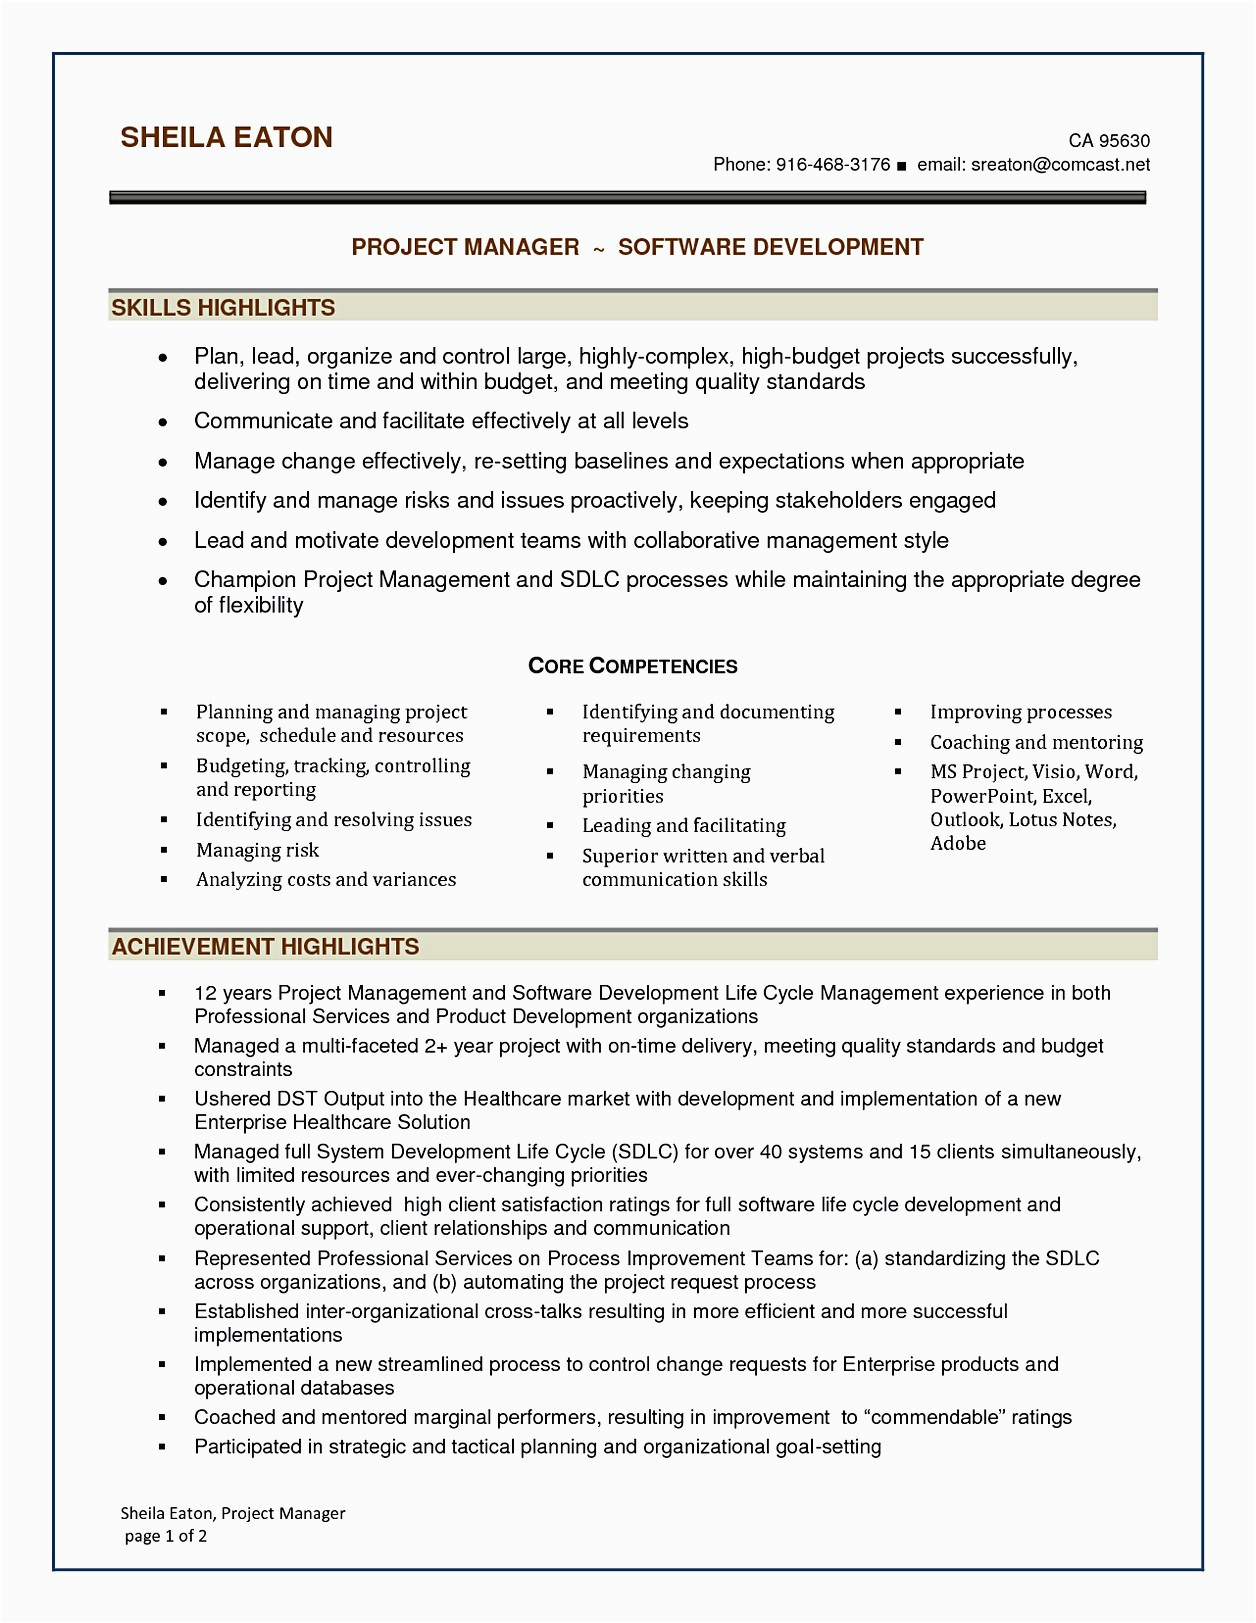 Sample Resume for Project Manager It software software Project Manager Resume